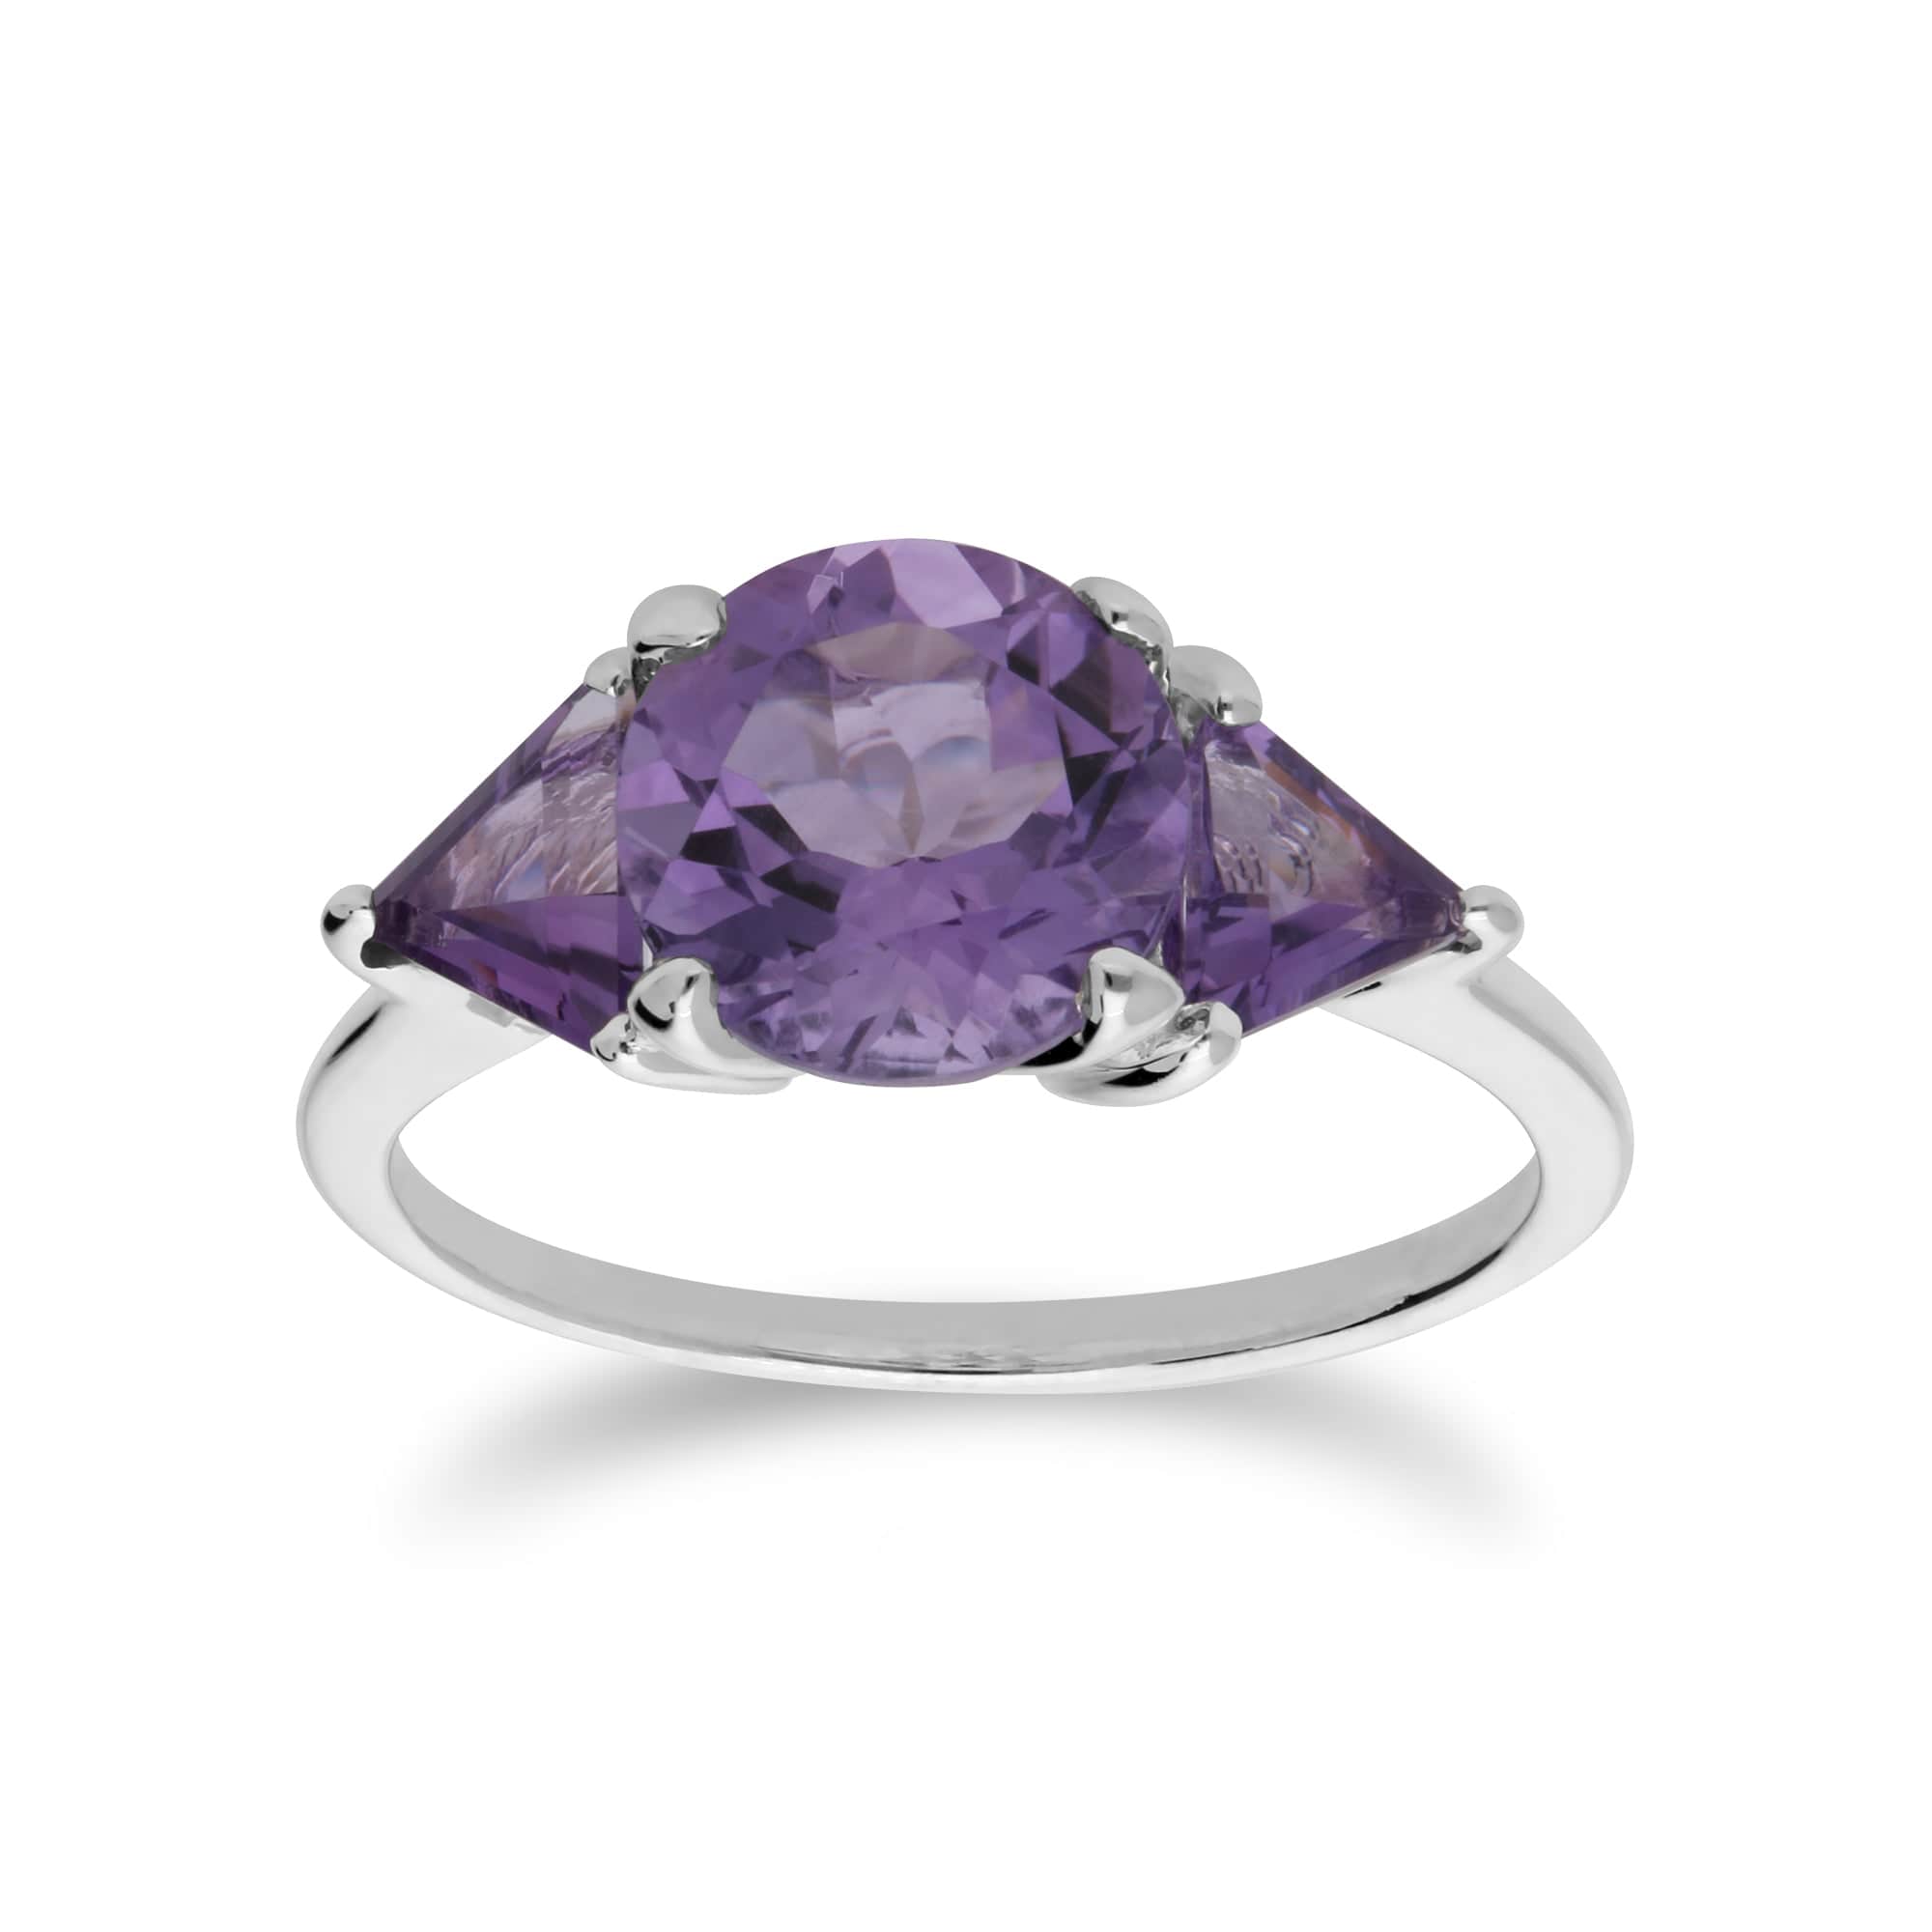 255R005501925 Classic Round & Prism Amethyst Three Stone Ring in 925 Sterling Silver 1